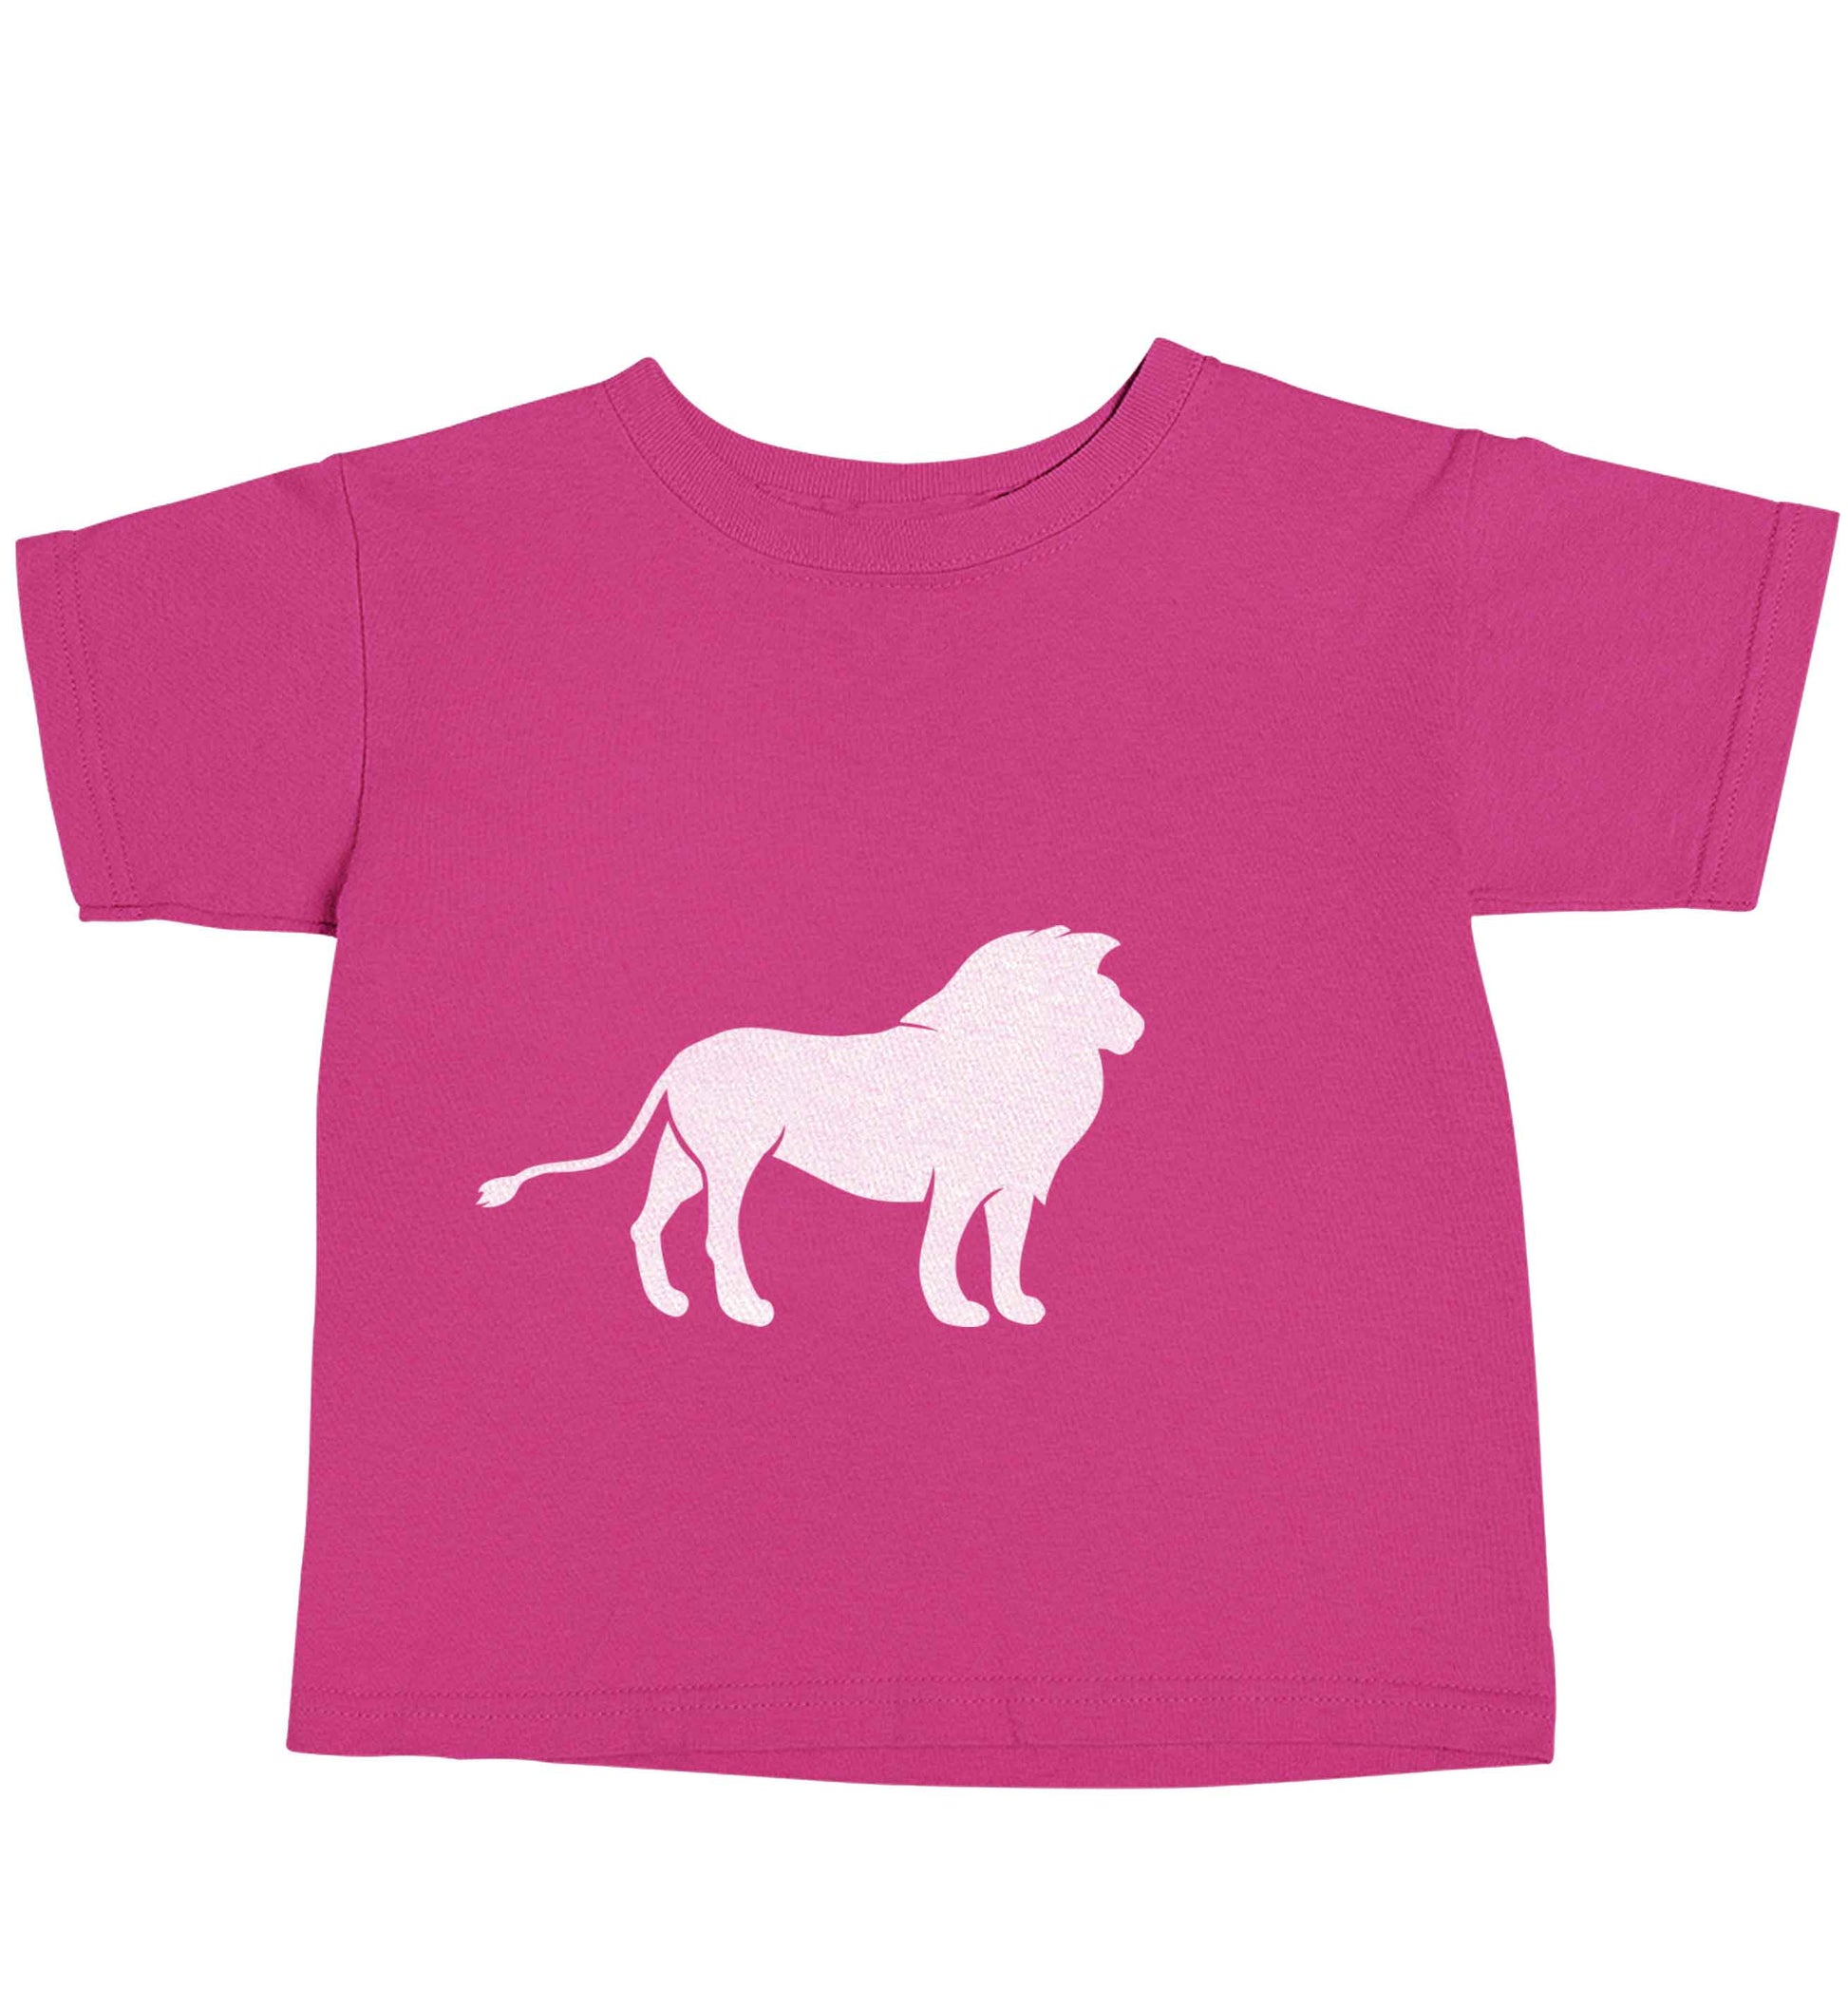 Gold lion pink baby toddler Tshirt 2 Years